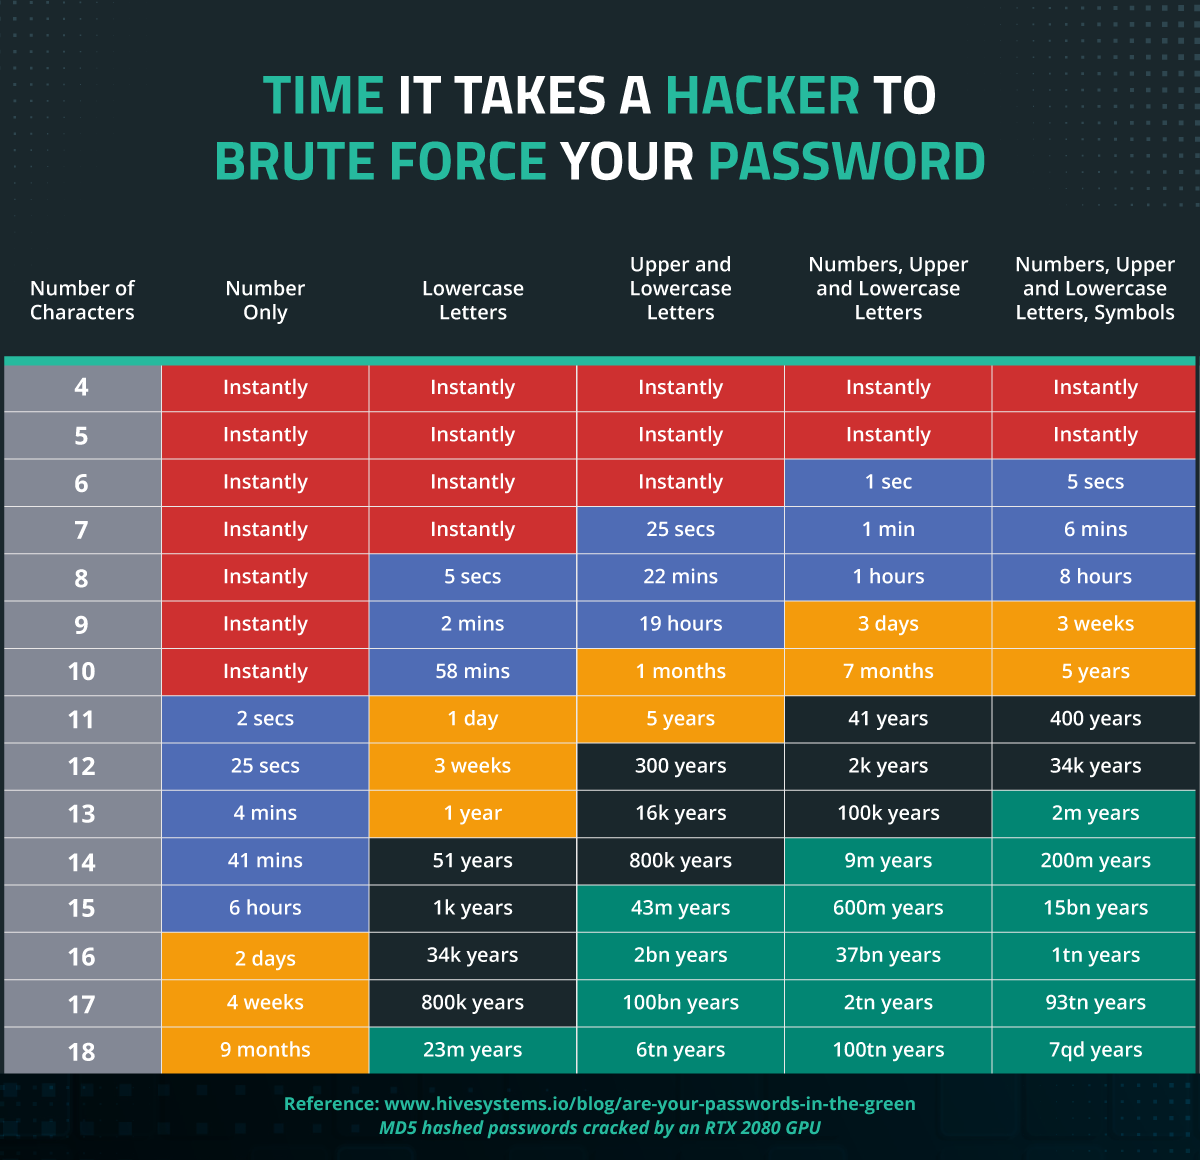 How long it takes a hacker to brute force your password